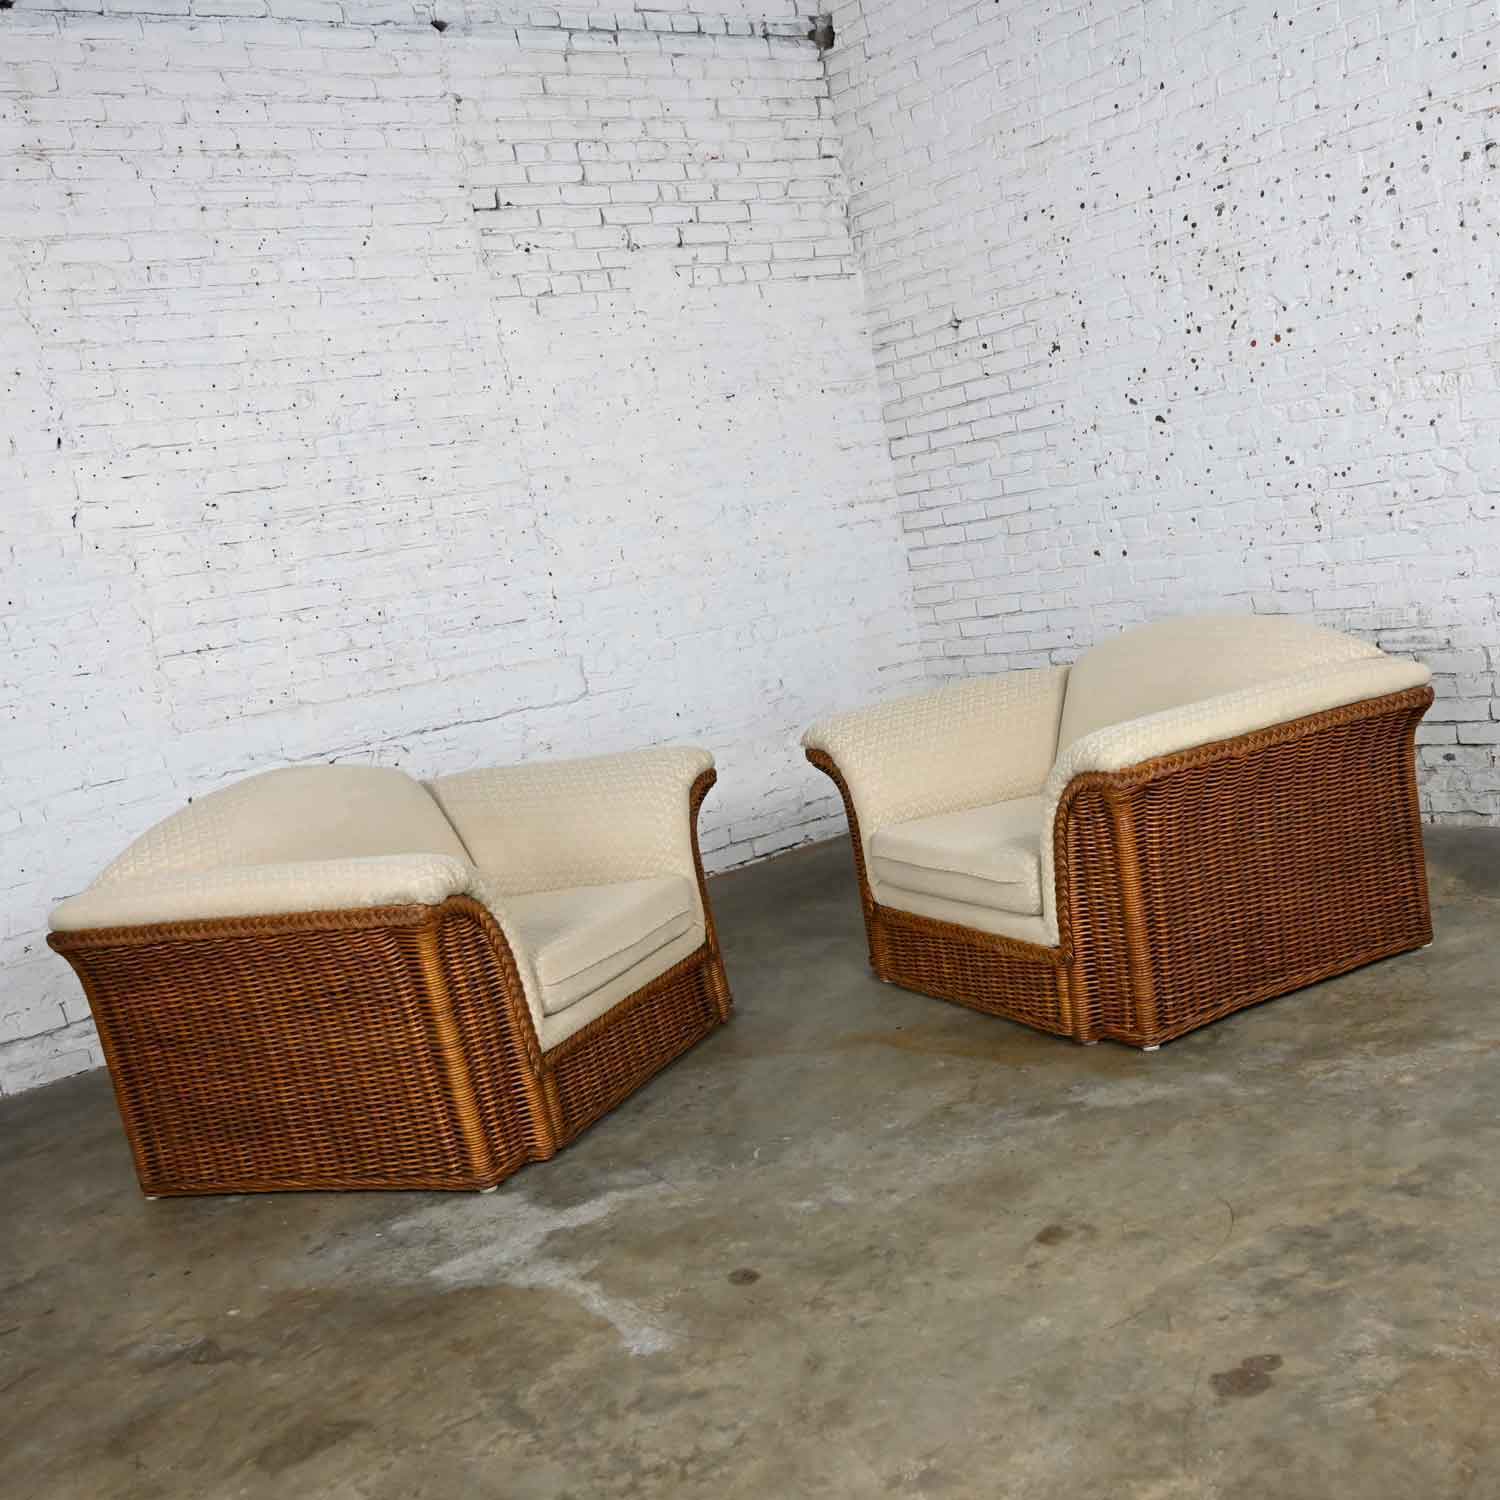 Rattan Wicker Pair of Oversized Lounge Chairs Manner of Michael Taylor